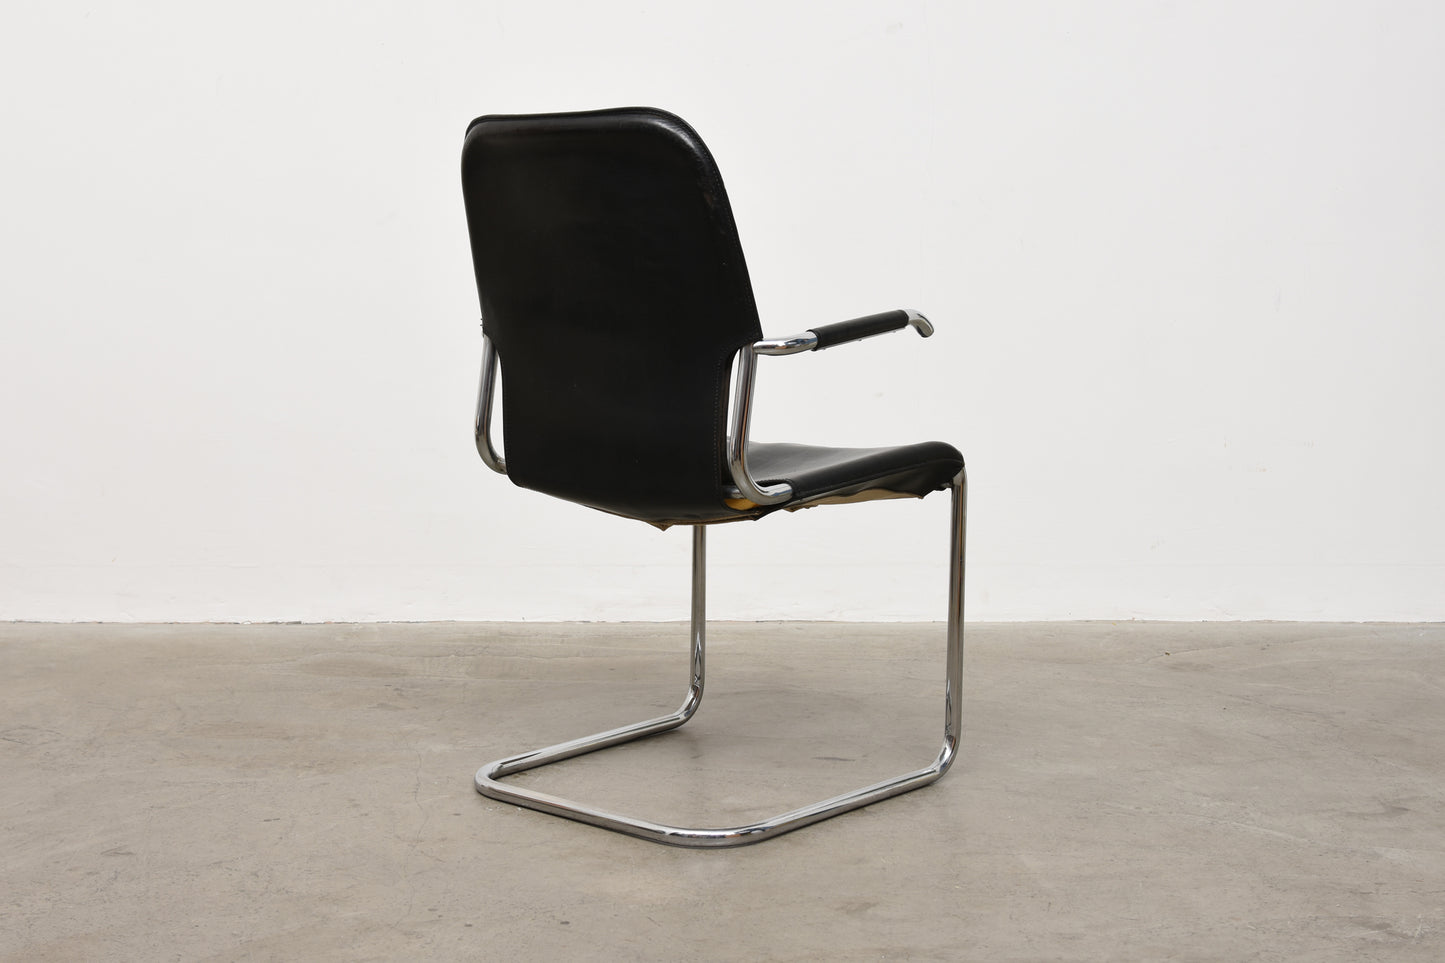 1980s leather + steel chair by Kenneth Bergenblad